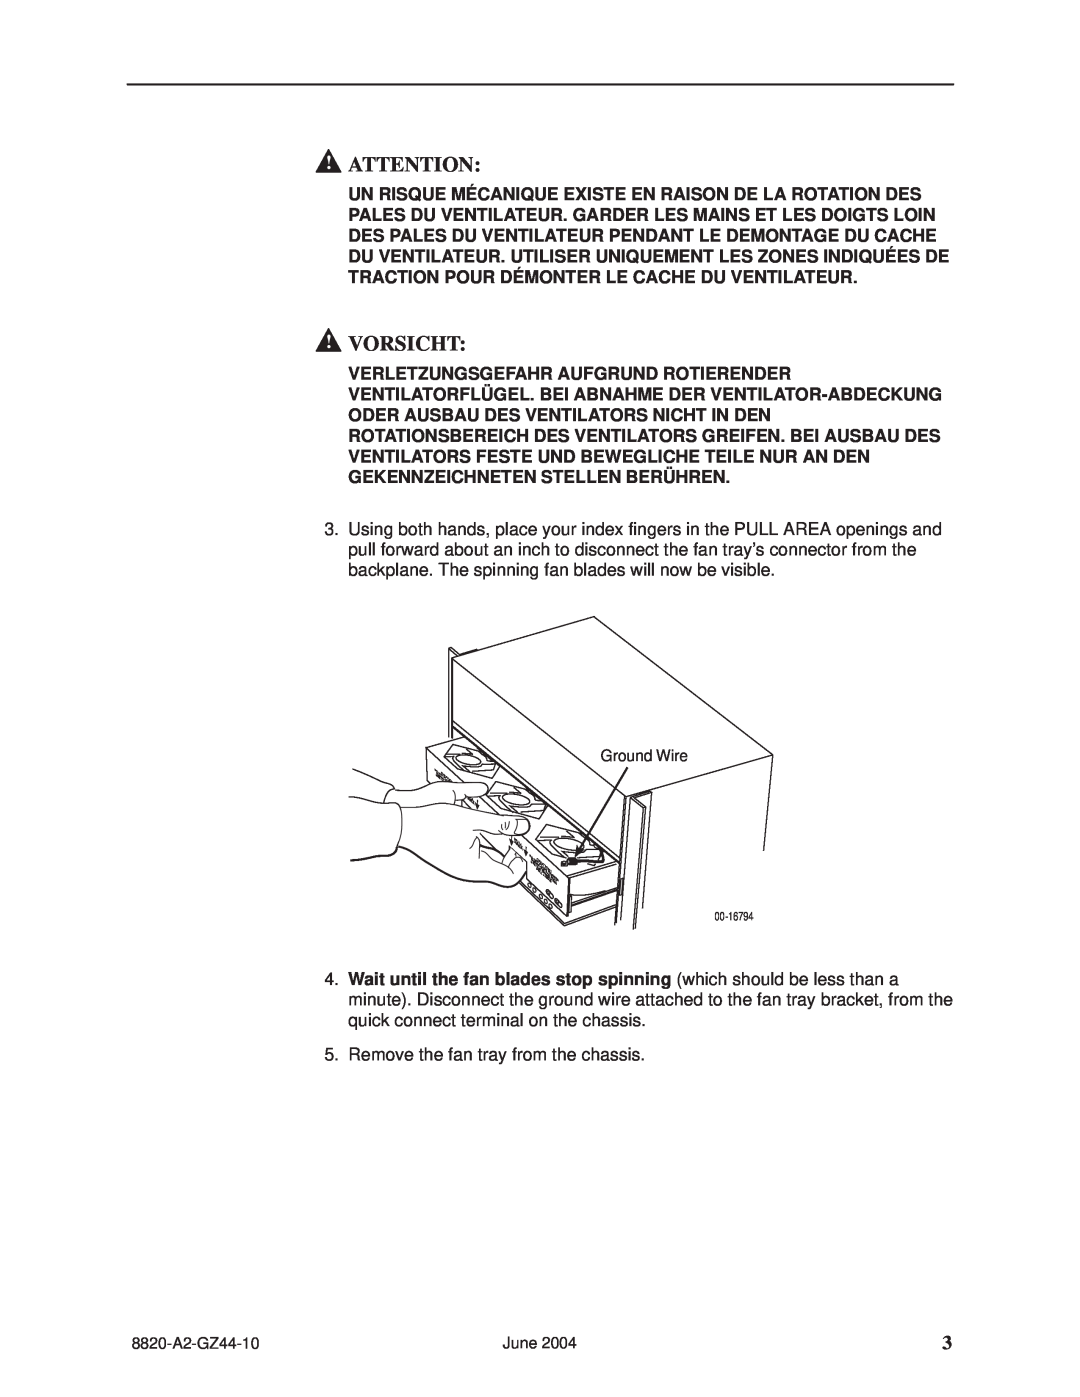 Paradyne 8820-S2-900 installation instructions Vorsicht, Remove the fan tray from the chassis 